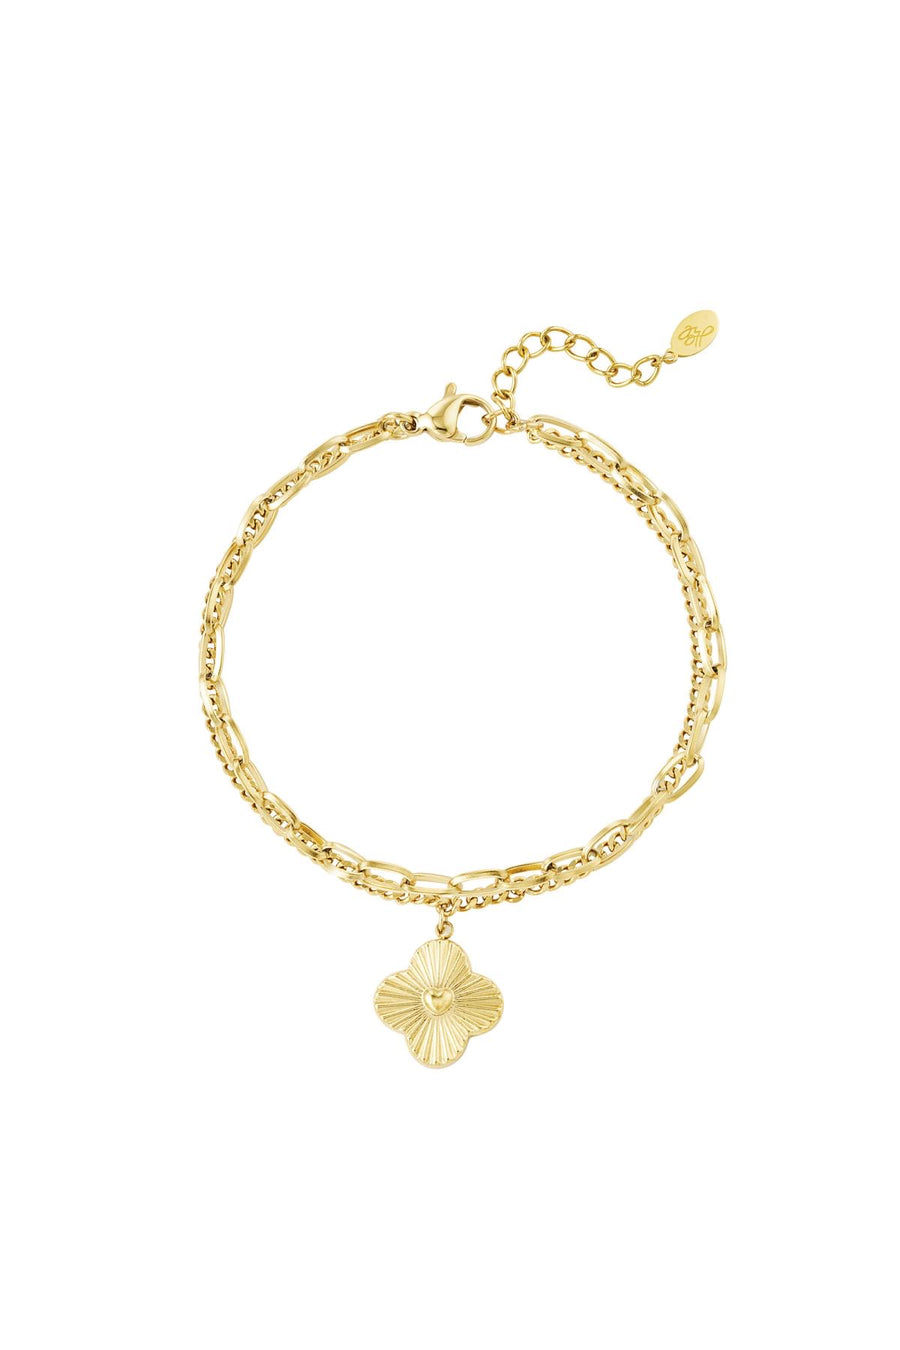 Layered Flower Bracelet Gold & Silver Available